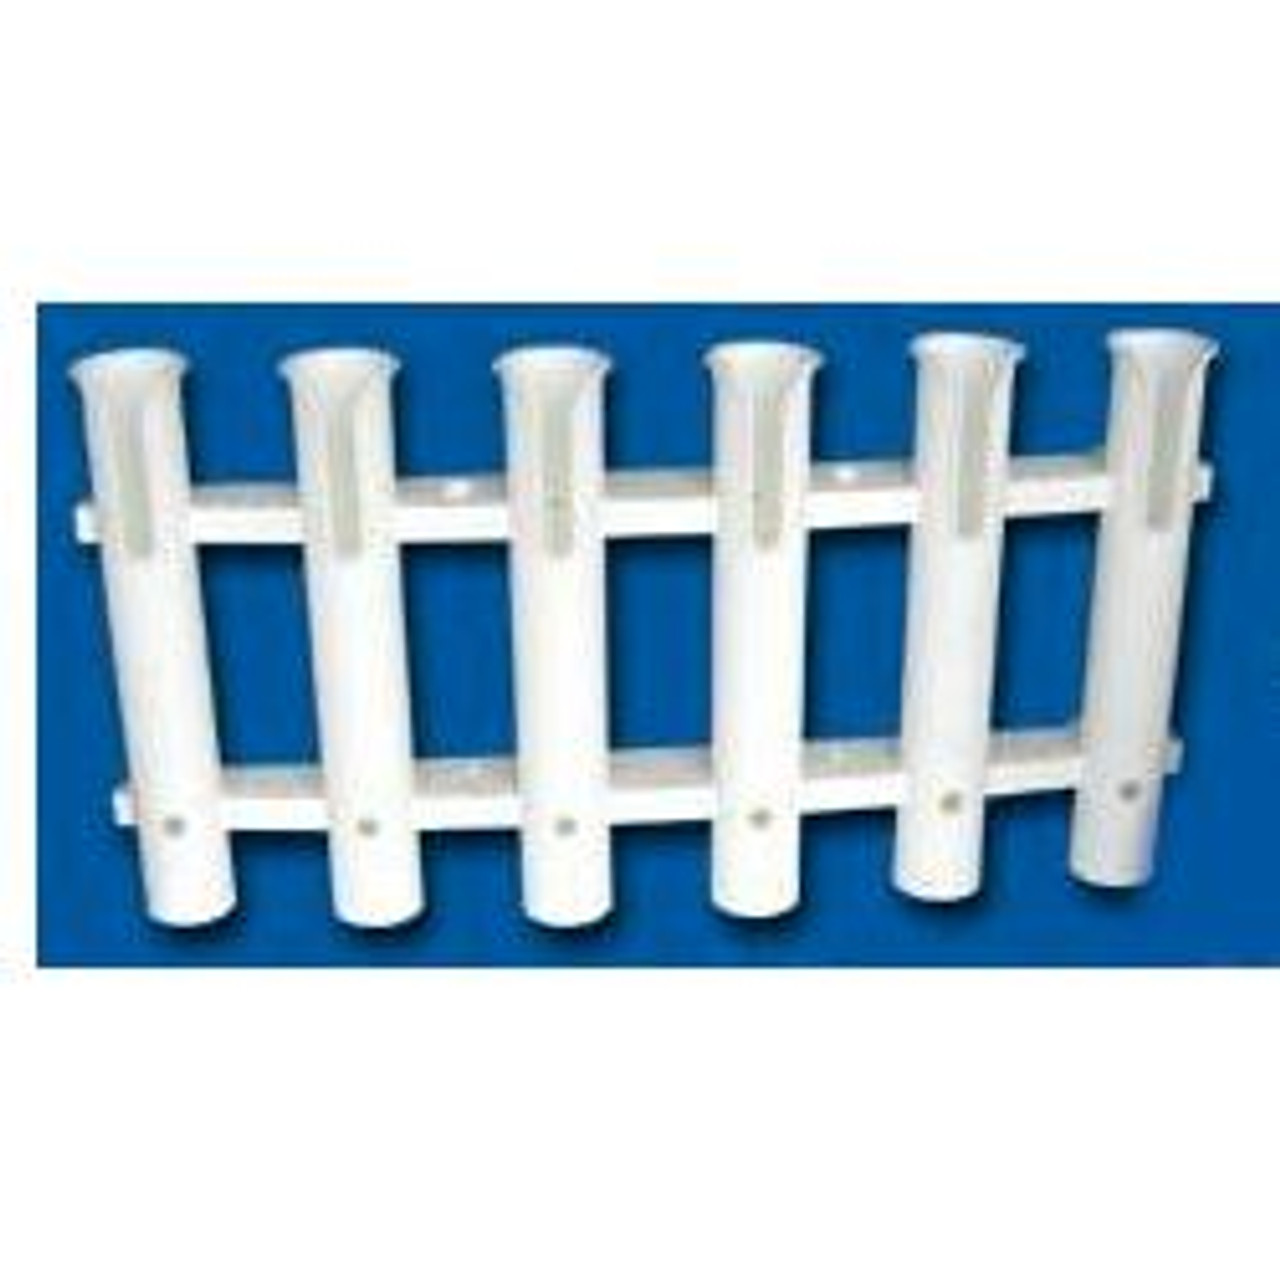 Deep Blue Marine Rod Holders for Home or Boat RH6